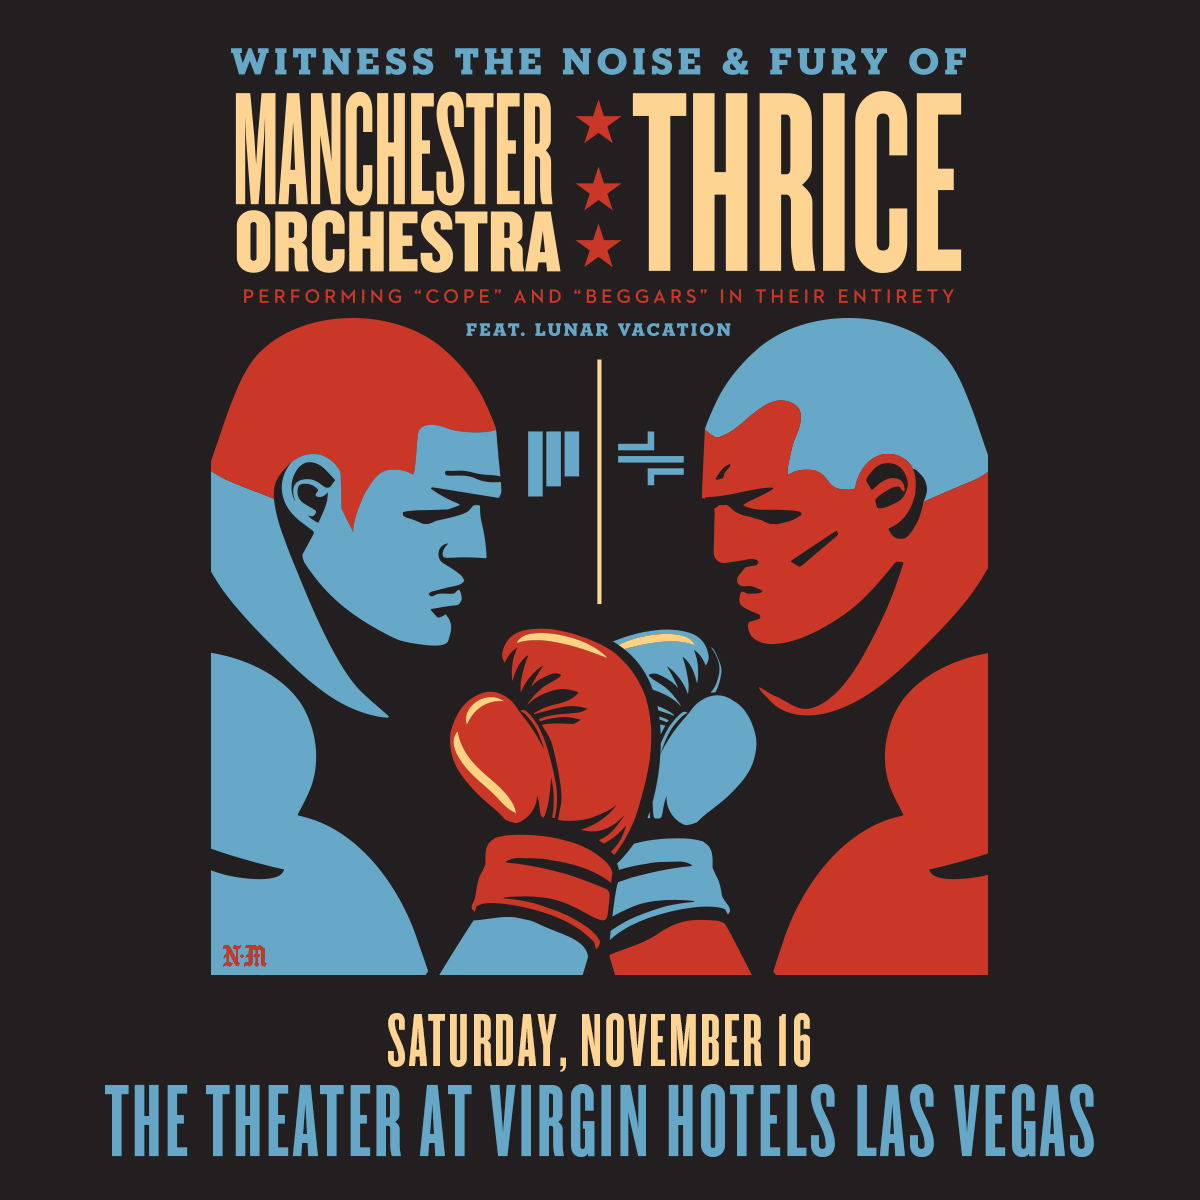 MANCHESTER ORCHESTRA & THRICEThe Theater at Virgin Hotels Las Vegas